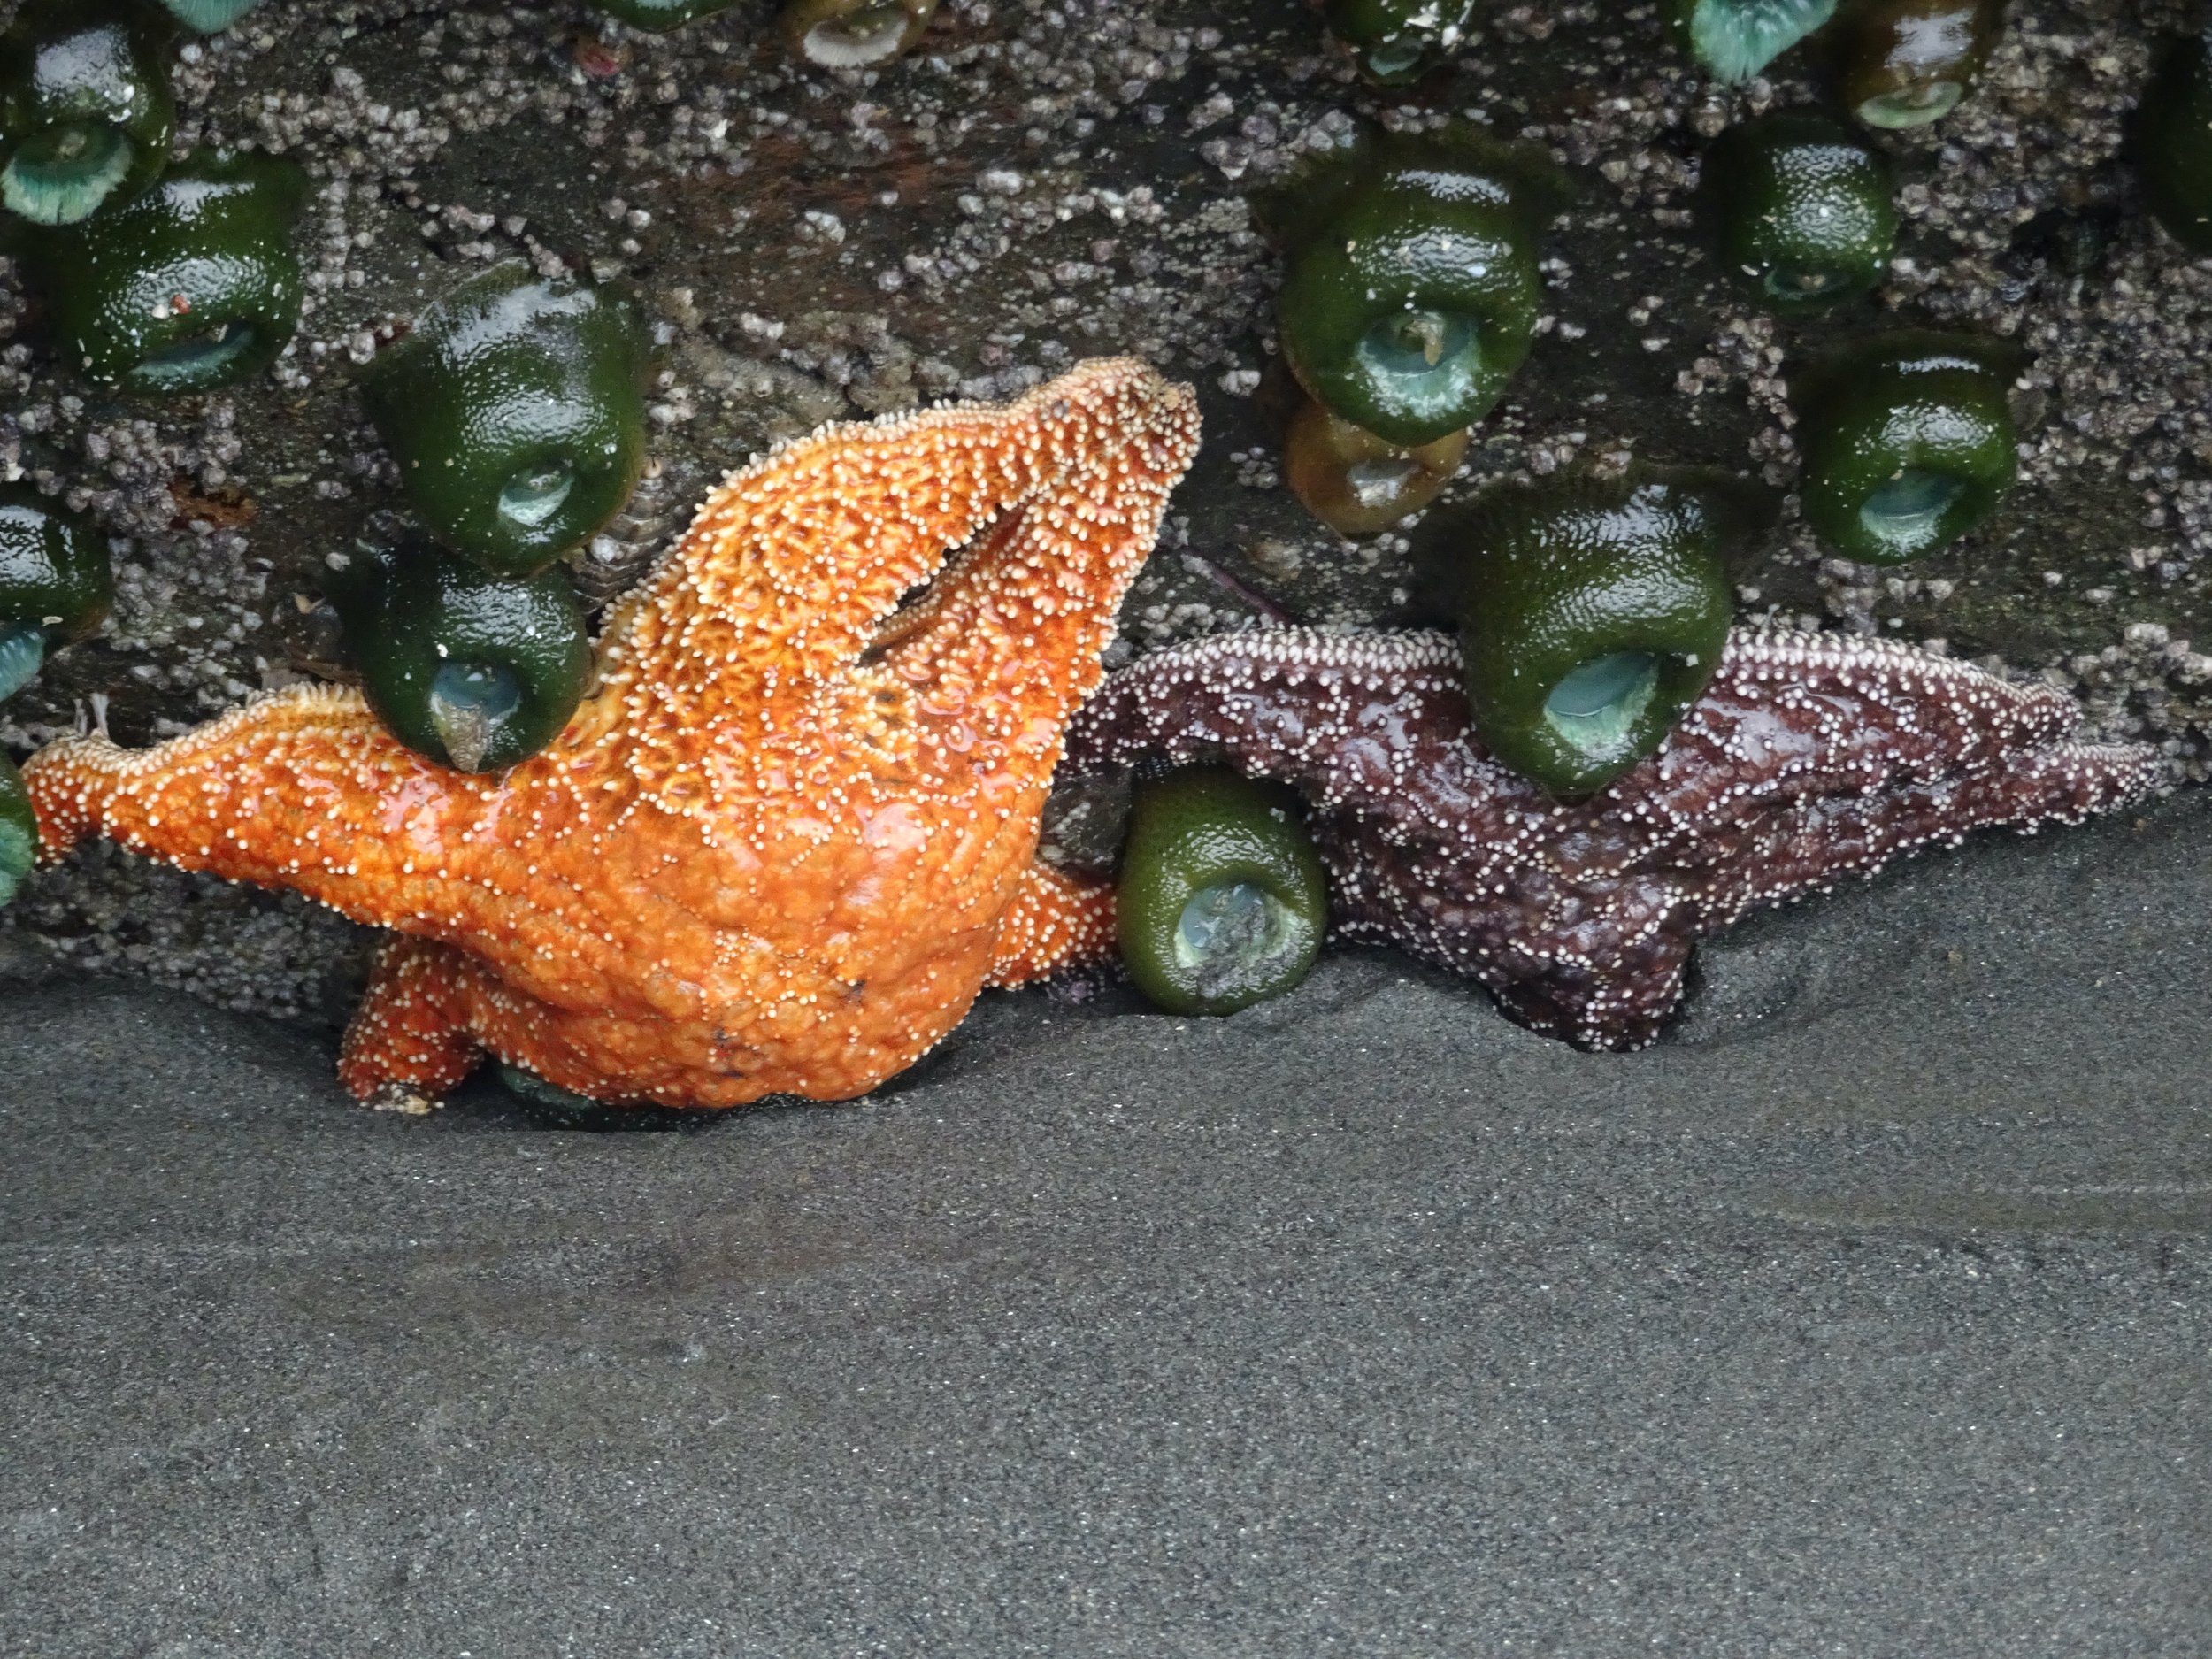 Cuddly sea star buddies lay along the ocean floor waiting for the tide to come back